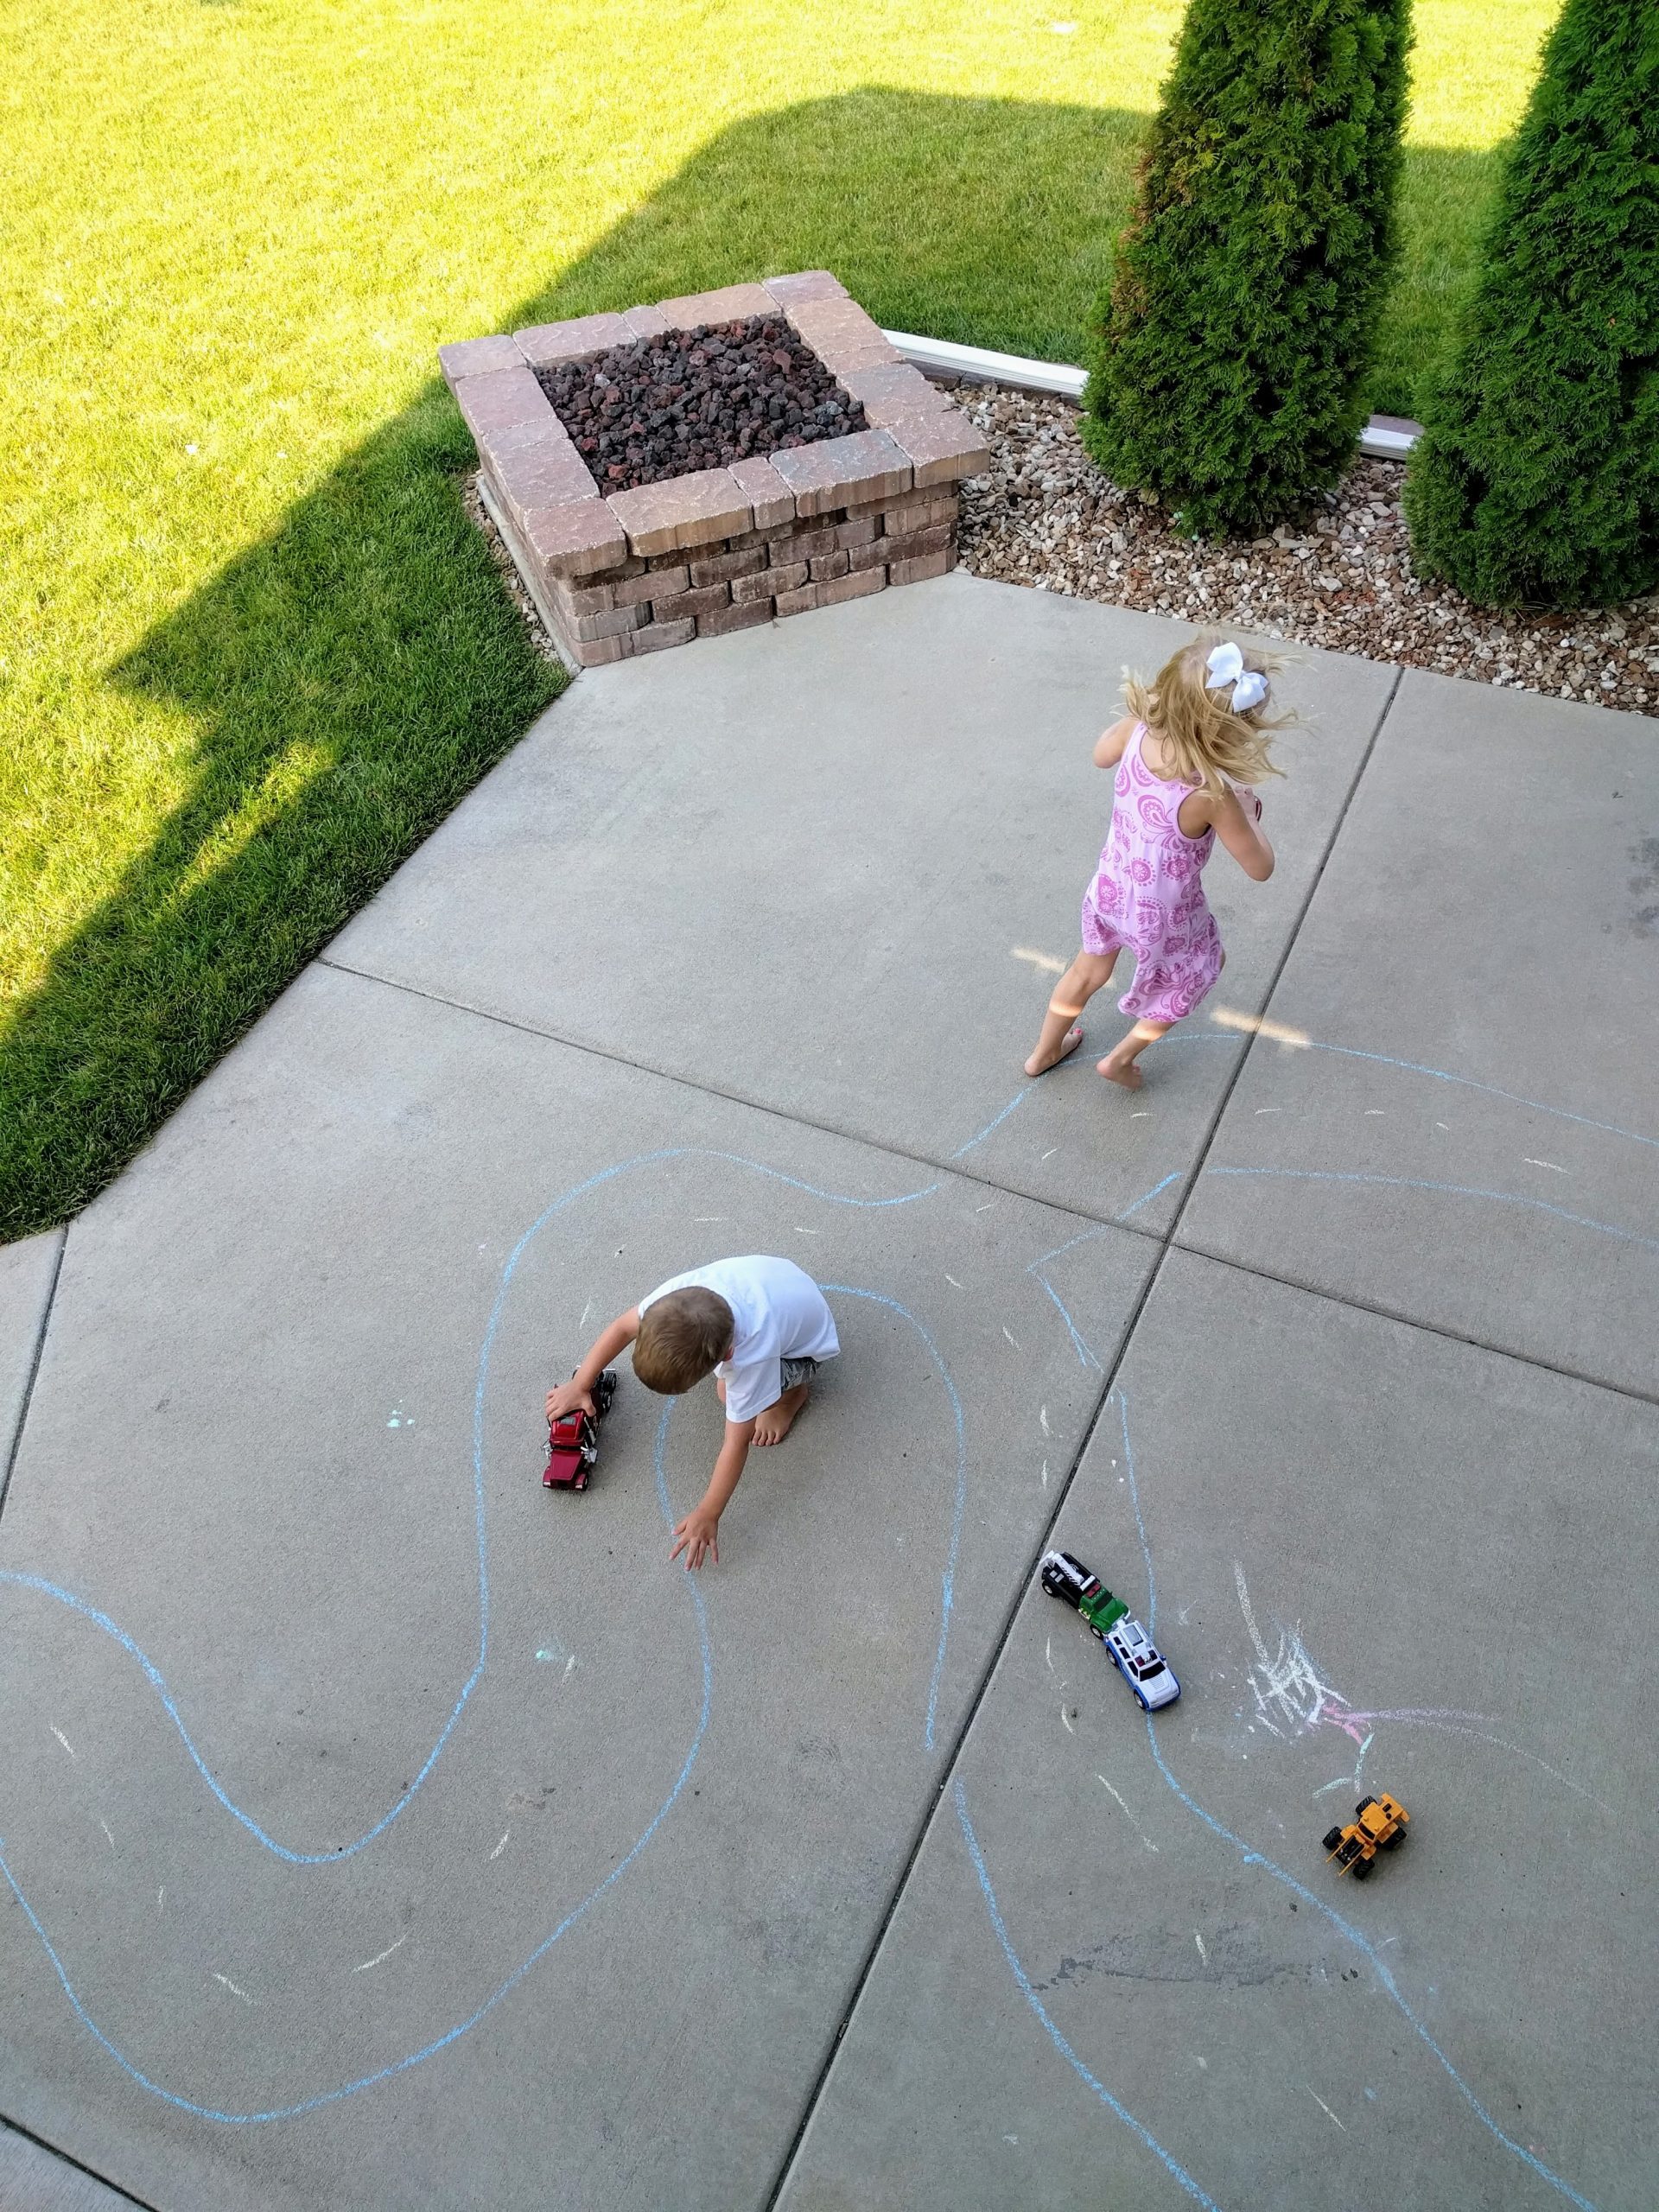 30 Backyard Games & Driveway Activities to Keep Kids Busy